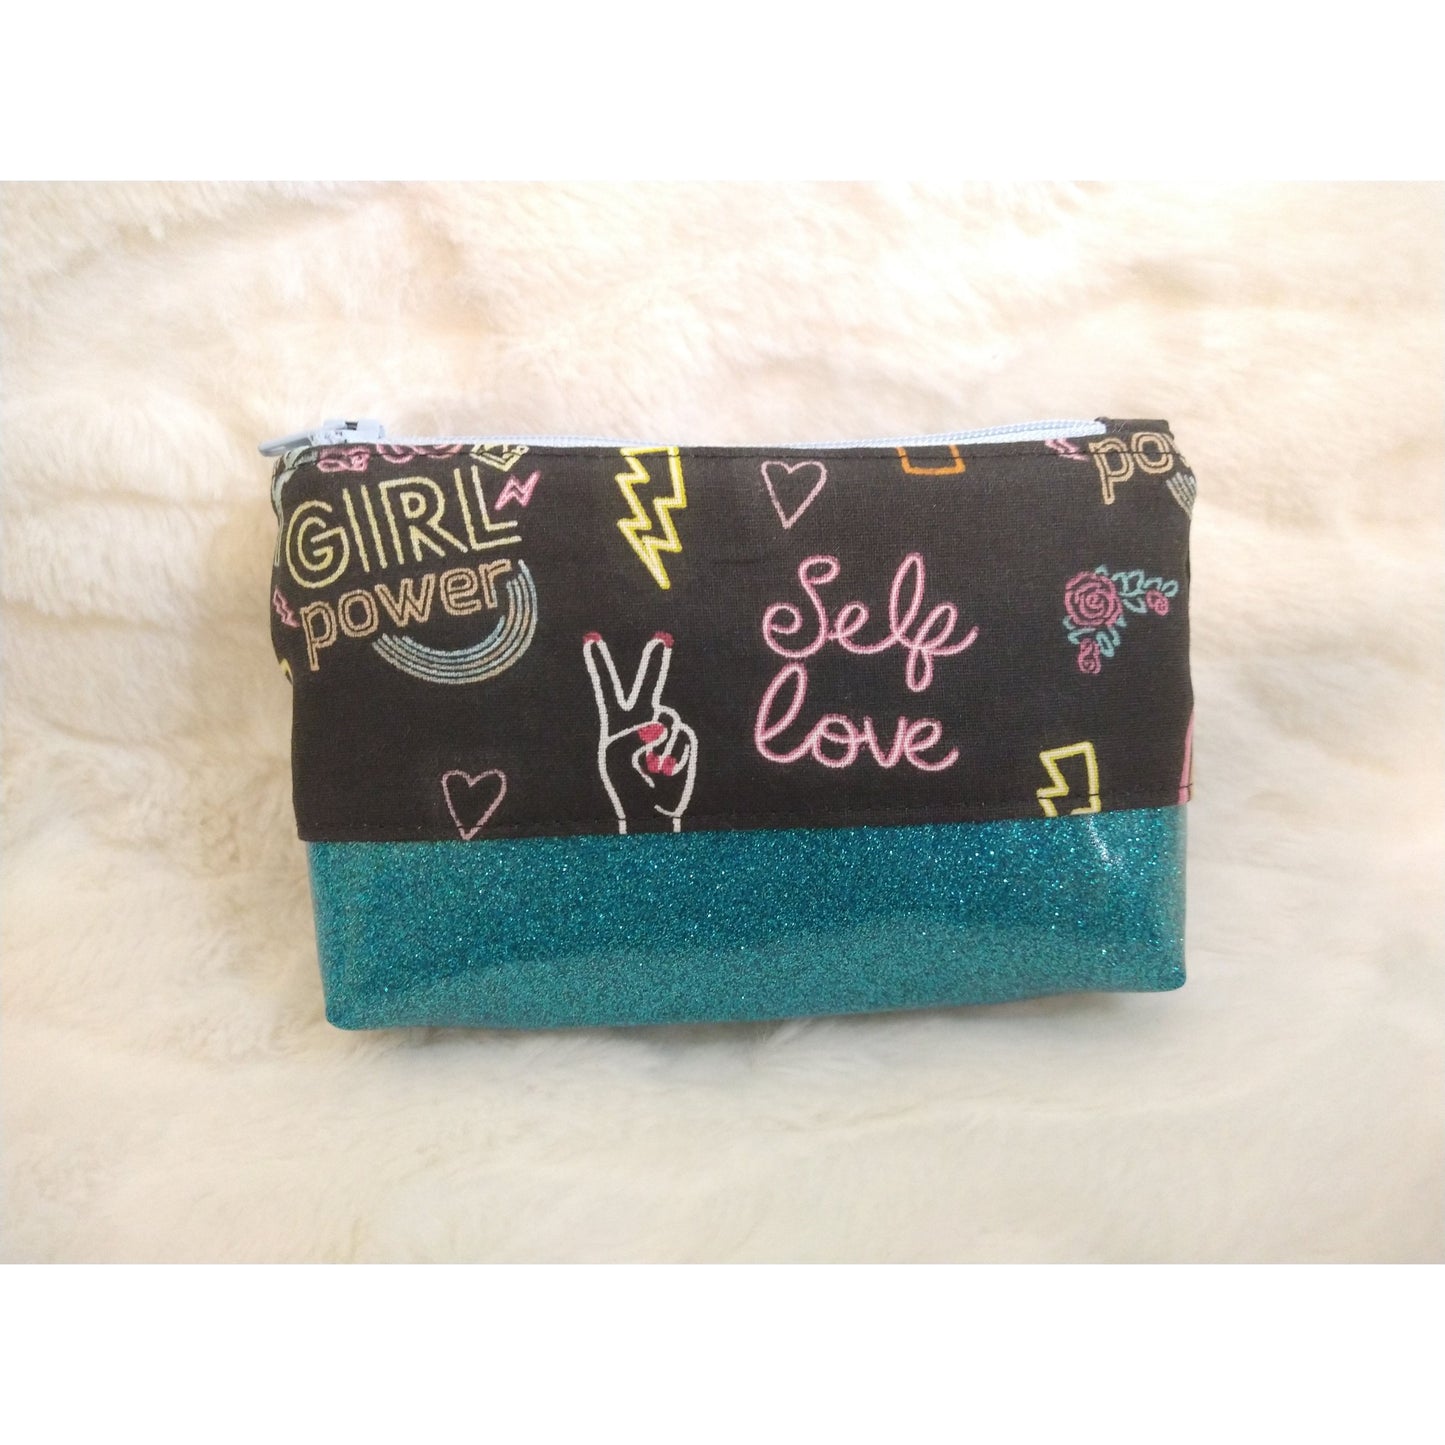 Girl Power Small Makeup Bag (Perfectly Imperfect)